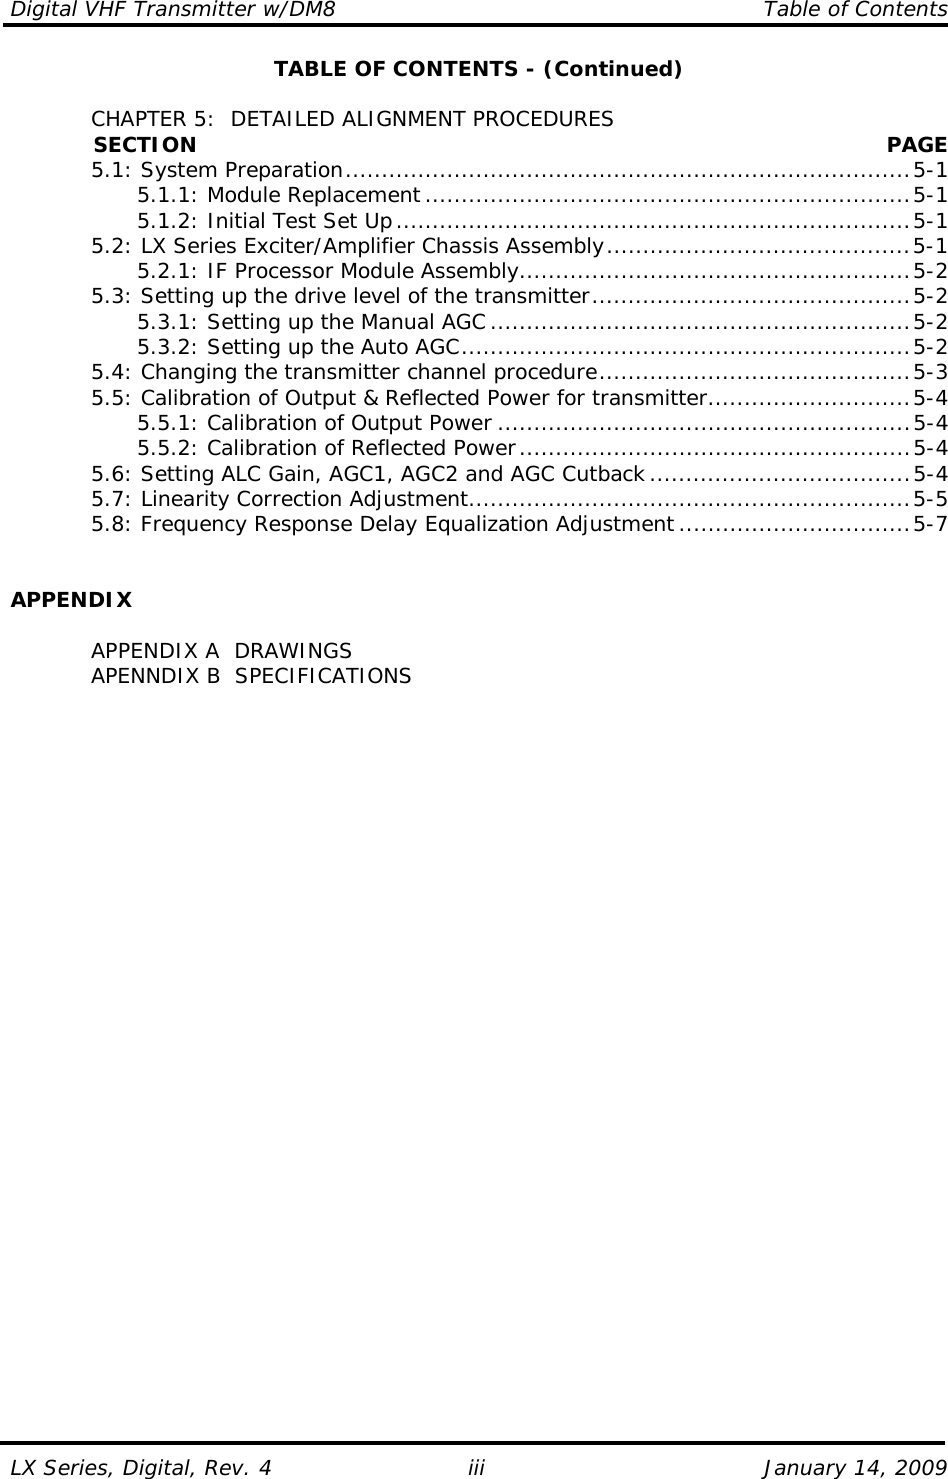 Digital VHF Transmitter w/DM8    Table of Contents  LX Series, Digital, Rev. 4    January 14, 2009 iiiTABLE OF CONTENTS - (Continued)    CHAPTER 5:  DETAILED ALIGNMENT PROCEDURES             SECTION PAGE   5.1: System Preparation..............................................................................5-1     5.1.1: Module Replacement ...................................................................5-1     5.1.2: Initial Test Set Up.......................................................................5-1   5.2: LX Series Exciter/Amplifier Chassis Assembly..........................................5-1     5.2.1: IF Processor Module Assembly......................................................5-2   5.3: Setting up the drive level of the transmitter............................................5-2     5.3.1: Setting up the Manual AGC ..........................................................5-2     5.3.2: Setting up the Auto AGC..............................................................5-2   5.4: Changing the transmitter channel procedure...........................................5-3   5.5: Calibration of Output &amp; Reflected Power for transmitter............................5-4     5.5.1: Calibration of Output Power .........................................................5-4     5.5.2: Calibration of Reflected Power......................................................5-4   5.6: Setting ALC Gain, AGC1, AGC2 and AGC Cutback ....................................5-4   5.7: Linearity Correction Adjustment.............................................................5-5   5.8: Frequency Response Delay Equalization Adjustment ................................5-7   APPENDIX    APPENDIX A  DRAWINGS   APENNDIX B  SPECIFICATIONS   